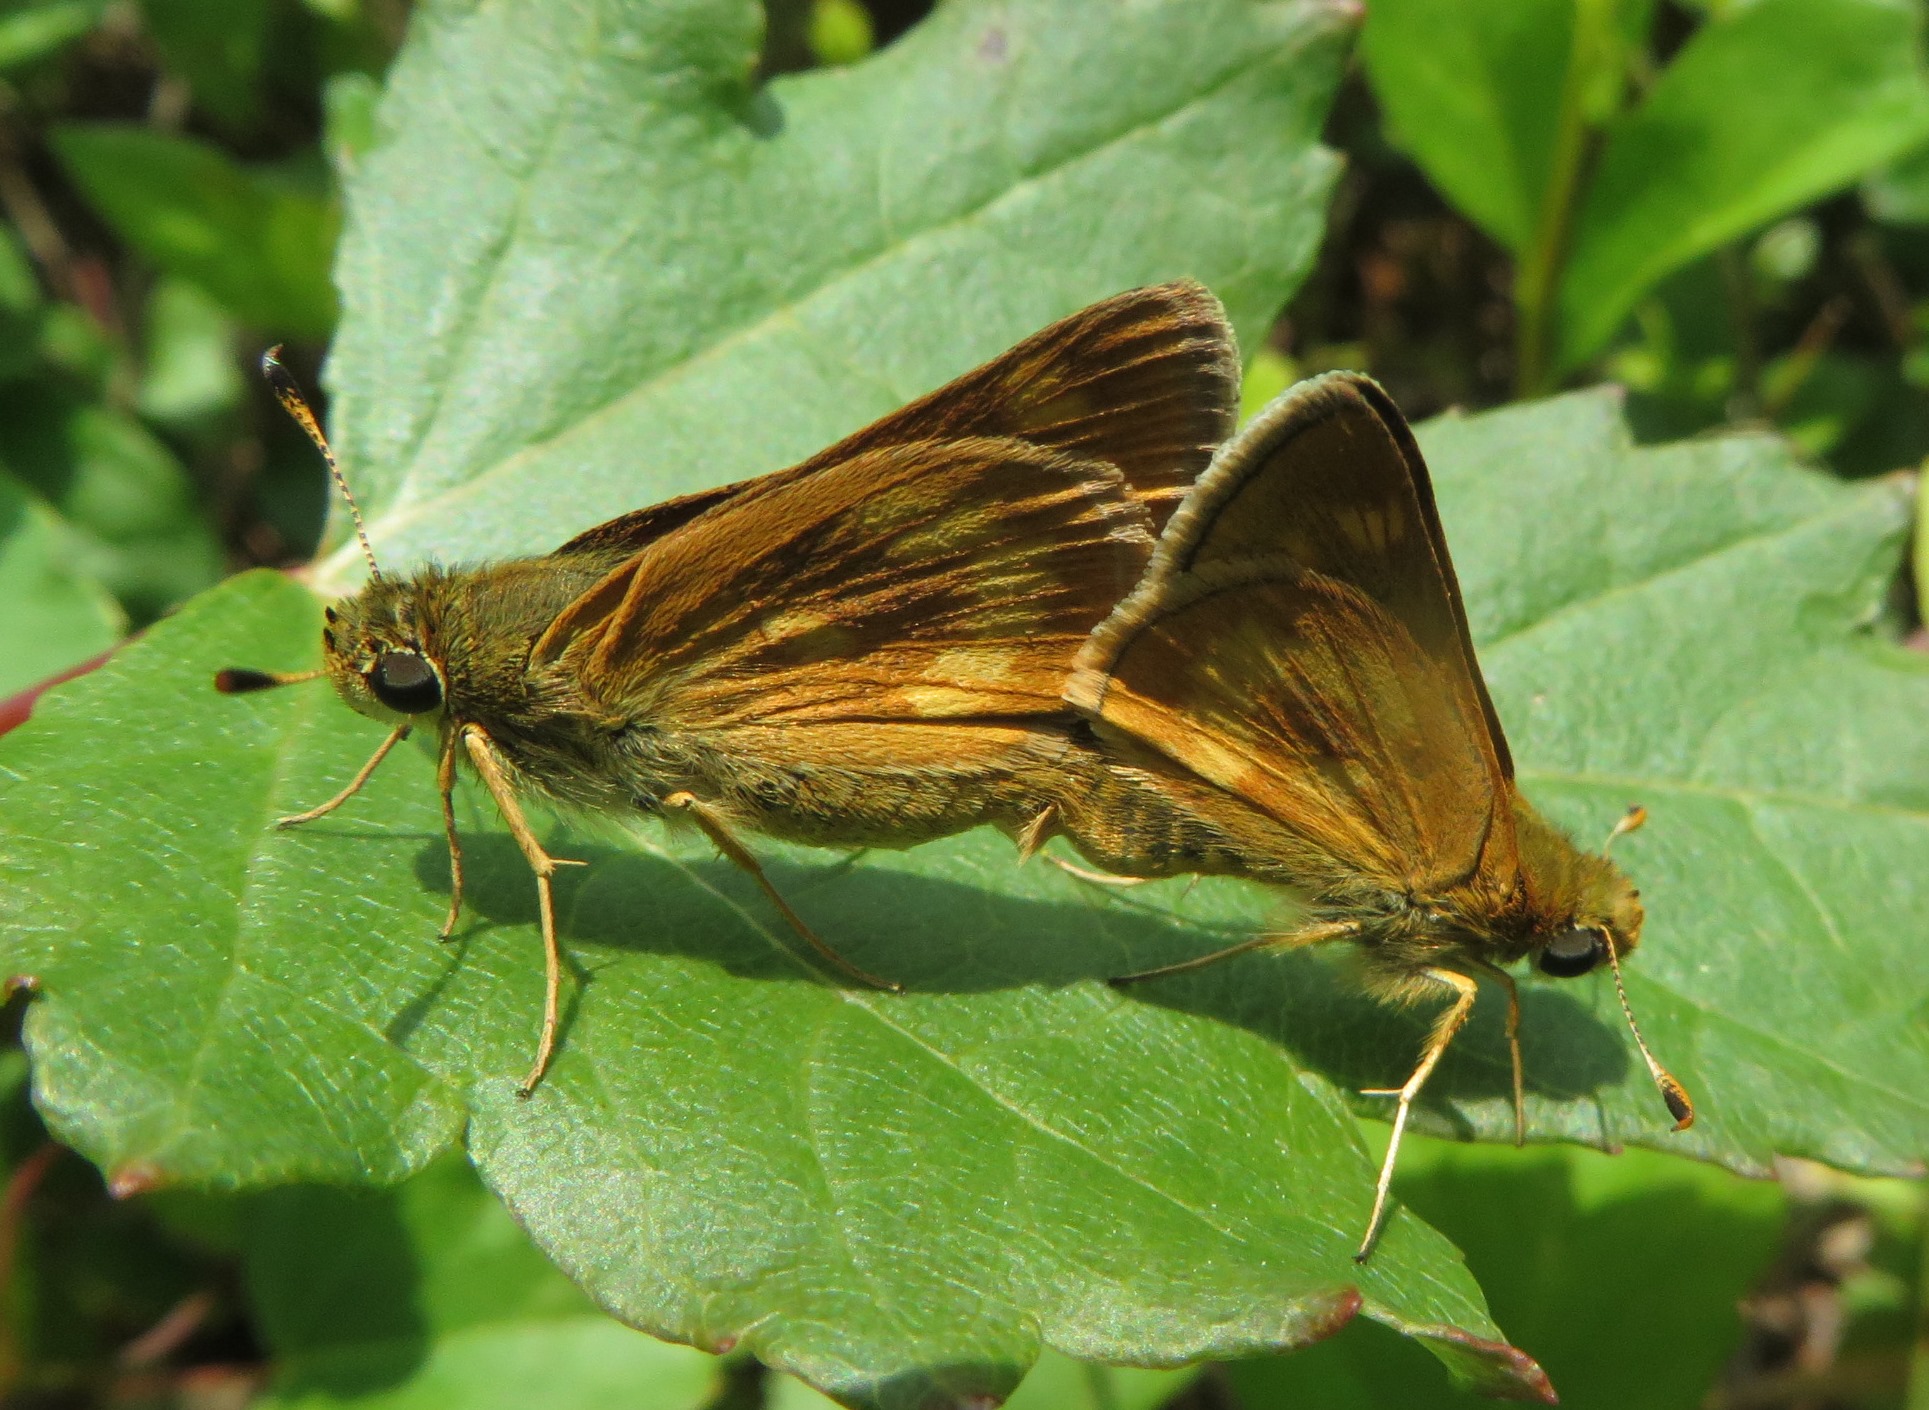 Two furry, brown and mahogany moths stand back-to-back, behinds touching, on a green leaf. More leaves can be seen in the background.